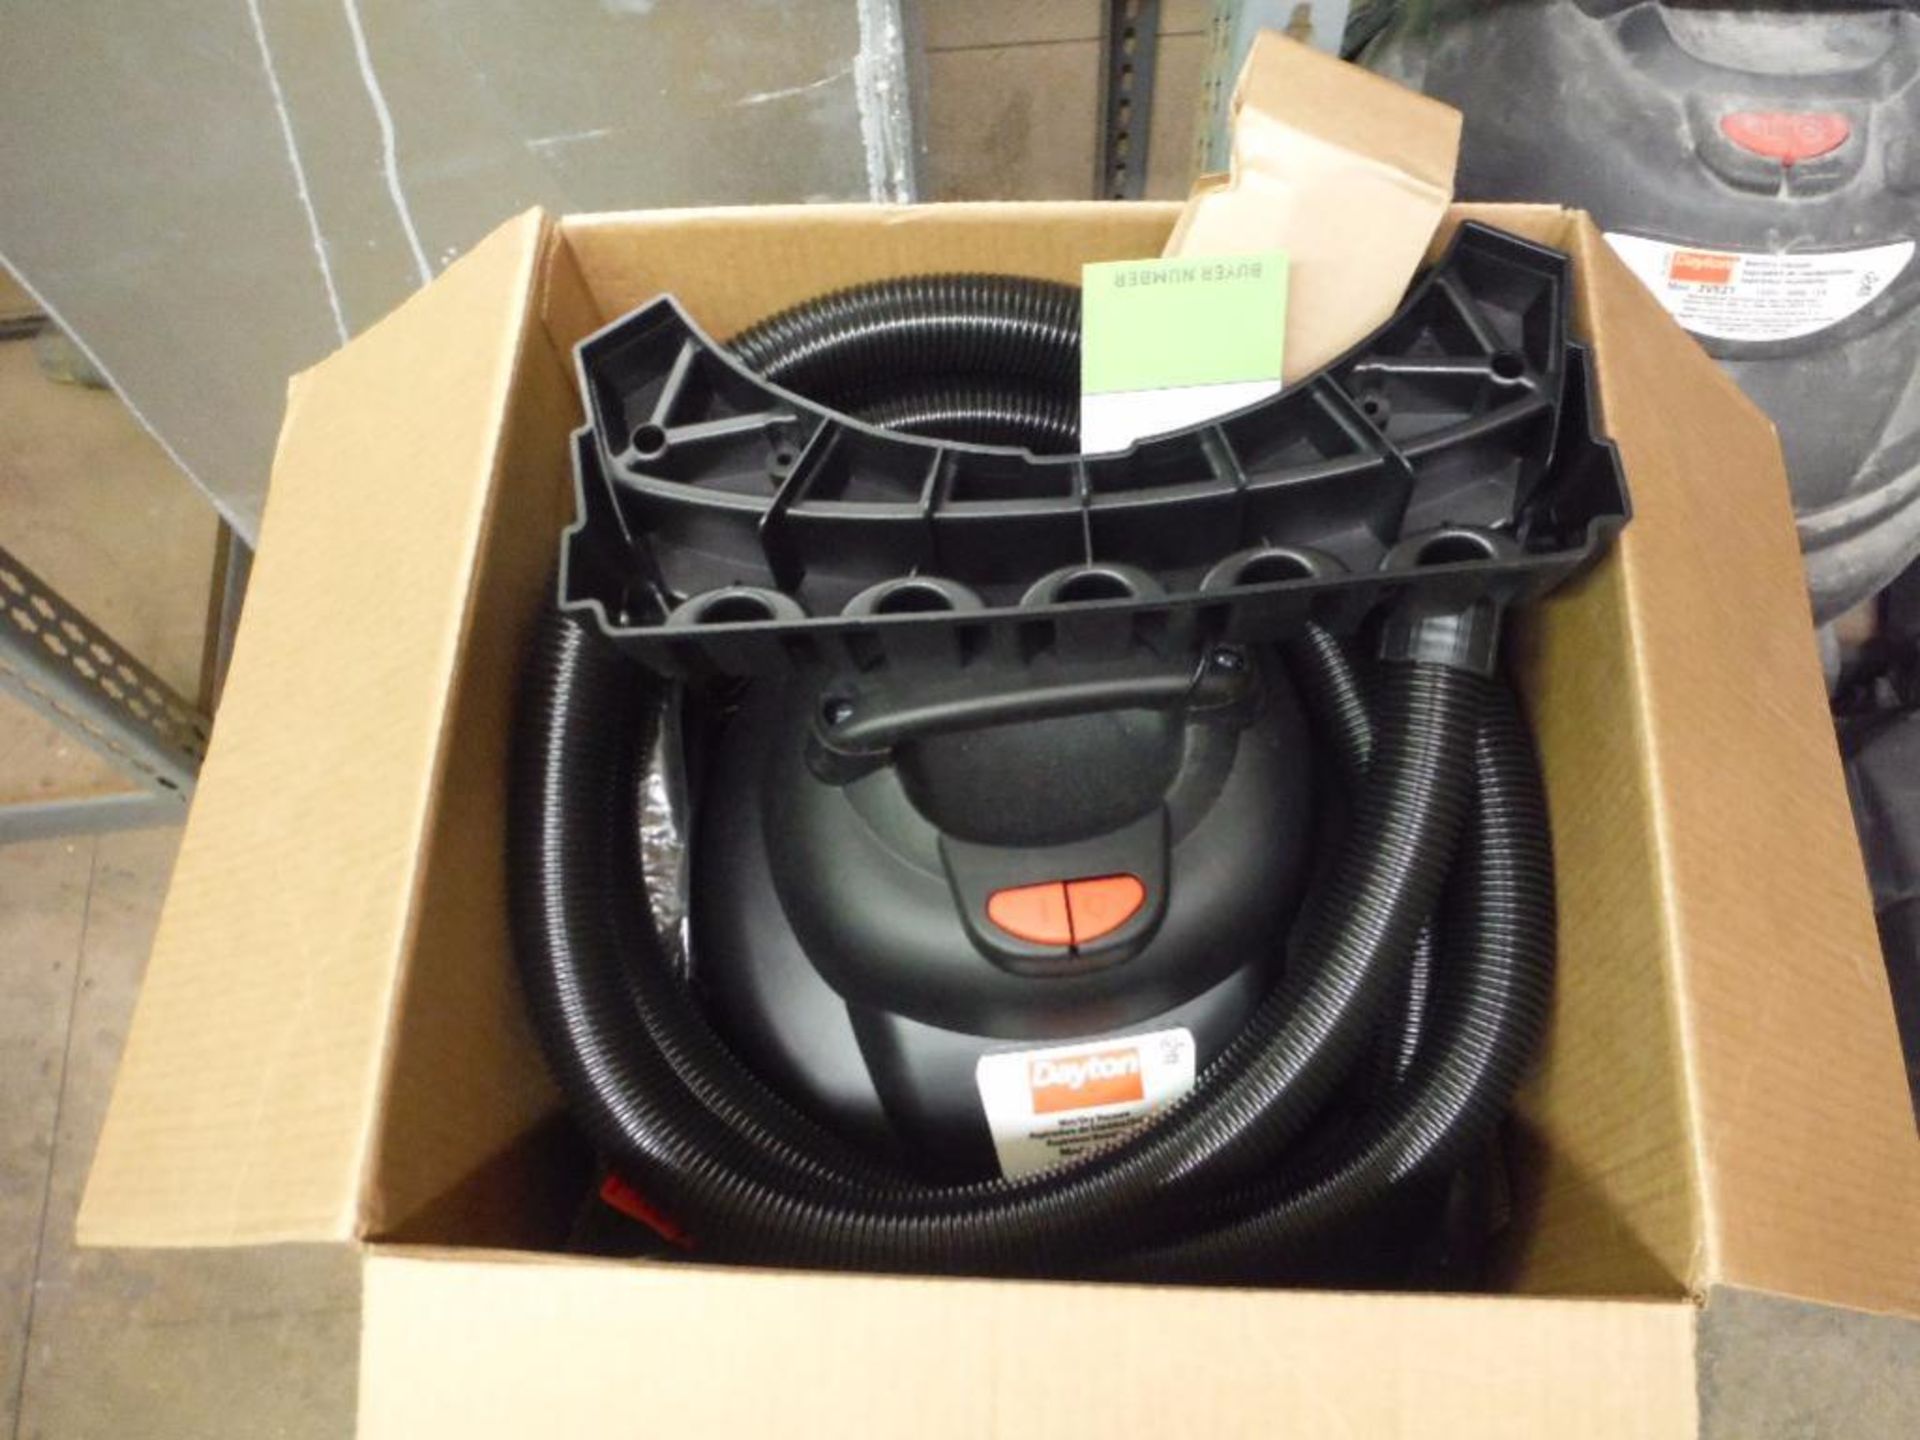 Contents of 1 sections of shelving, new in box Dayton shop vac, multiple used shop vacs ** Rigging - Image 2 of 12